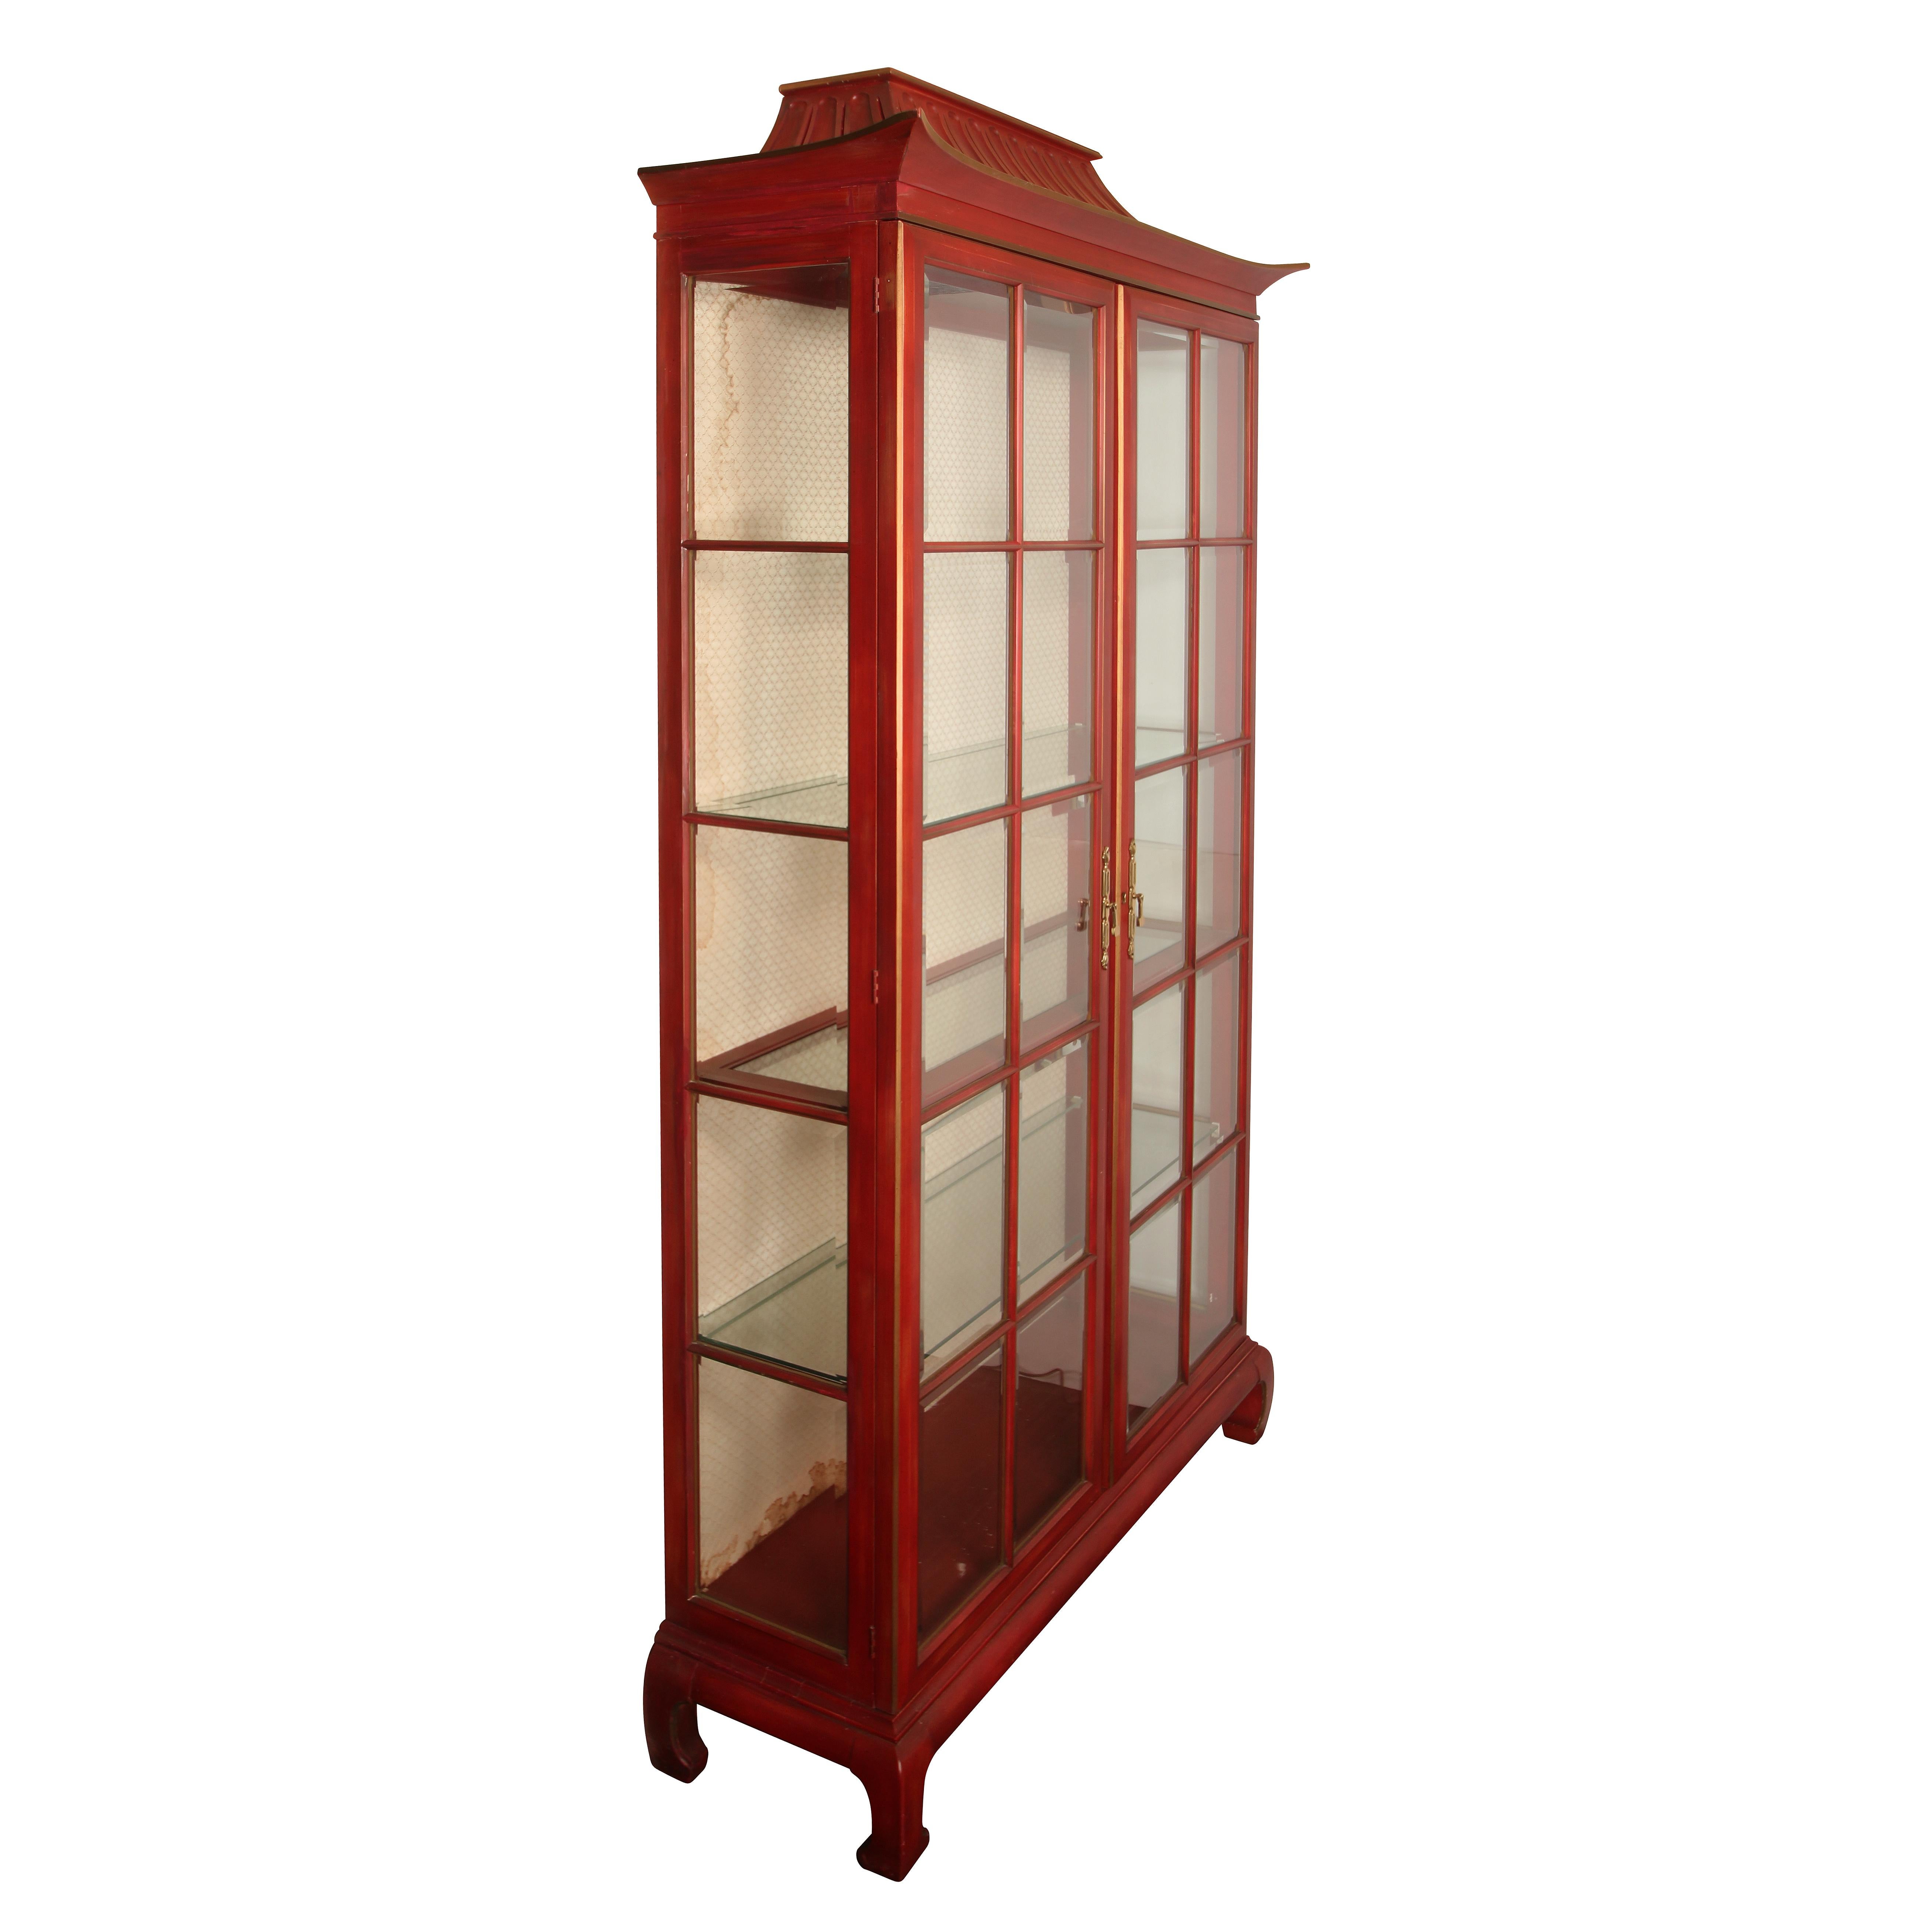 A tall, vintage chinoiserie pagoda form, red display cabinet with four shelves and a cloth lined back.